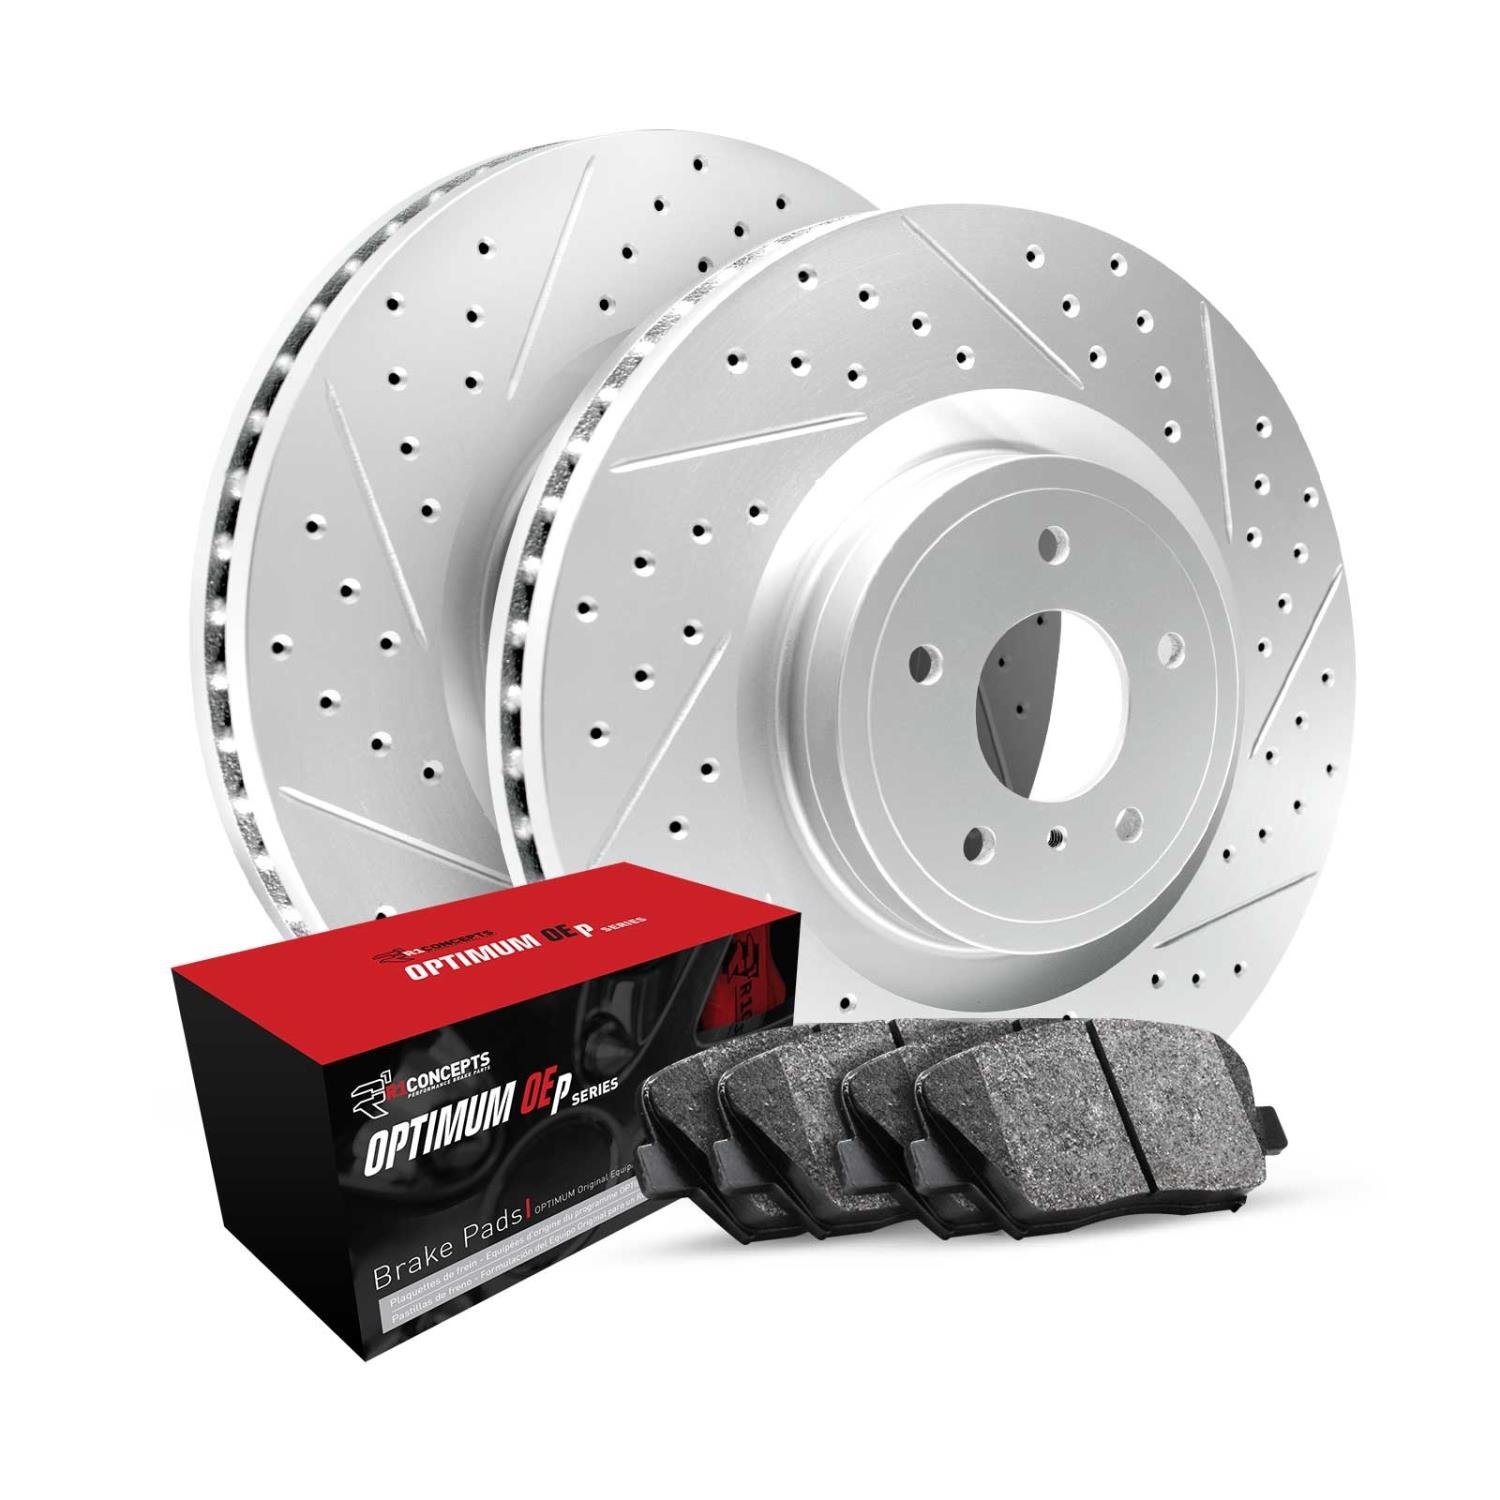 GEO-Carbon Drilled/Slotted Rotors w/Optimum OE Pads, 1986-1986